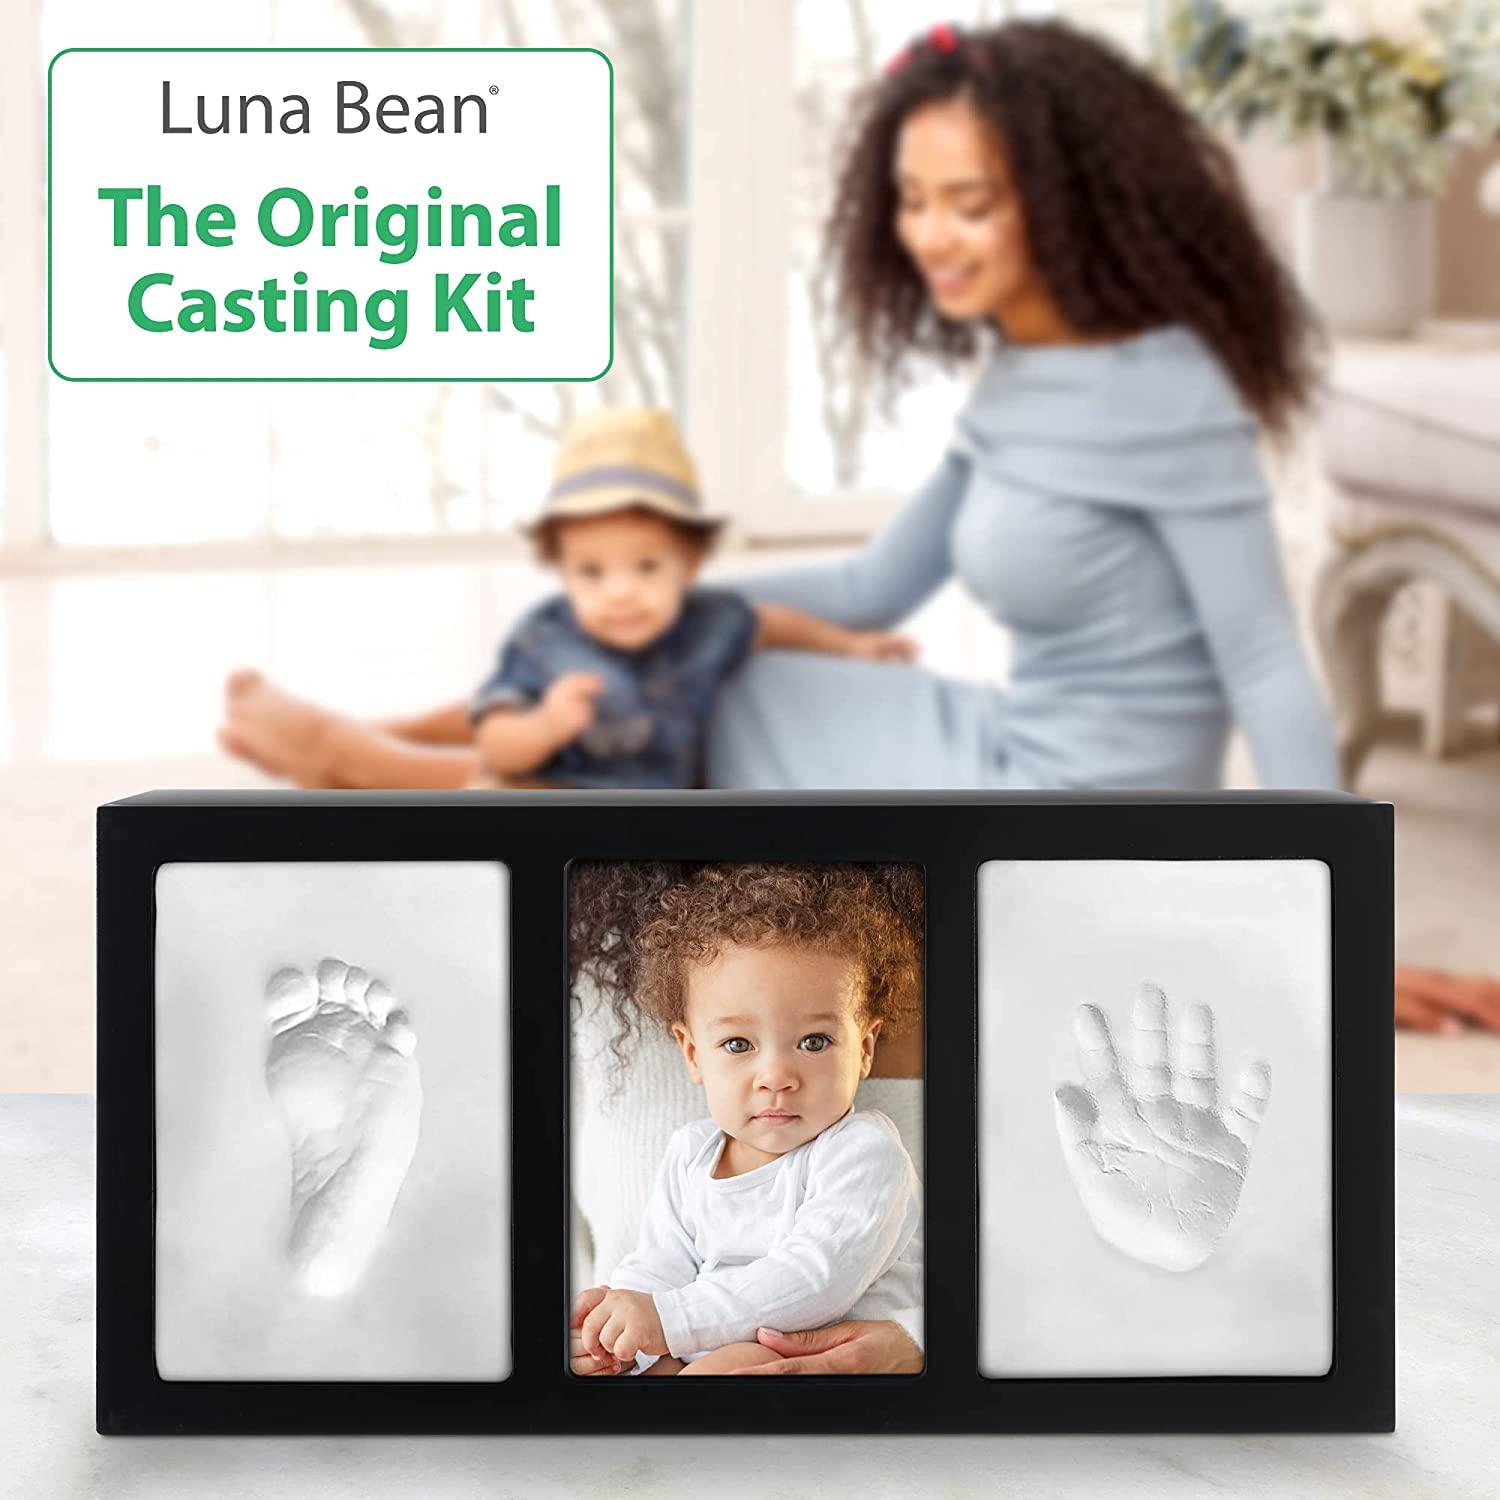 Luna Bean Intertwined Family Size Plaster Hand Mold Casting Kit